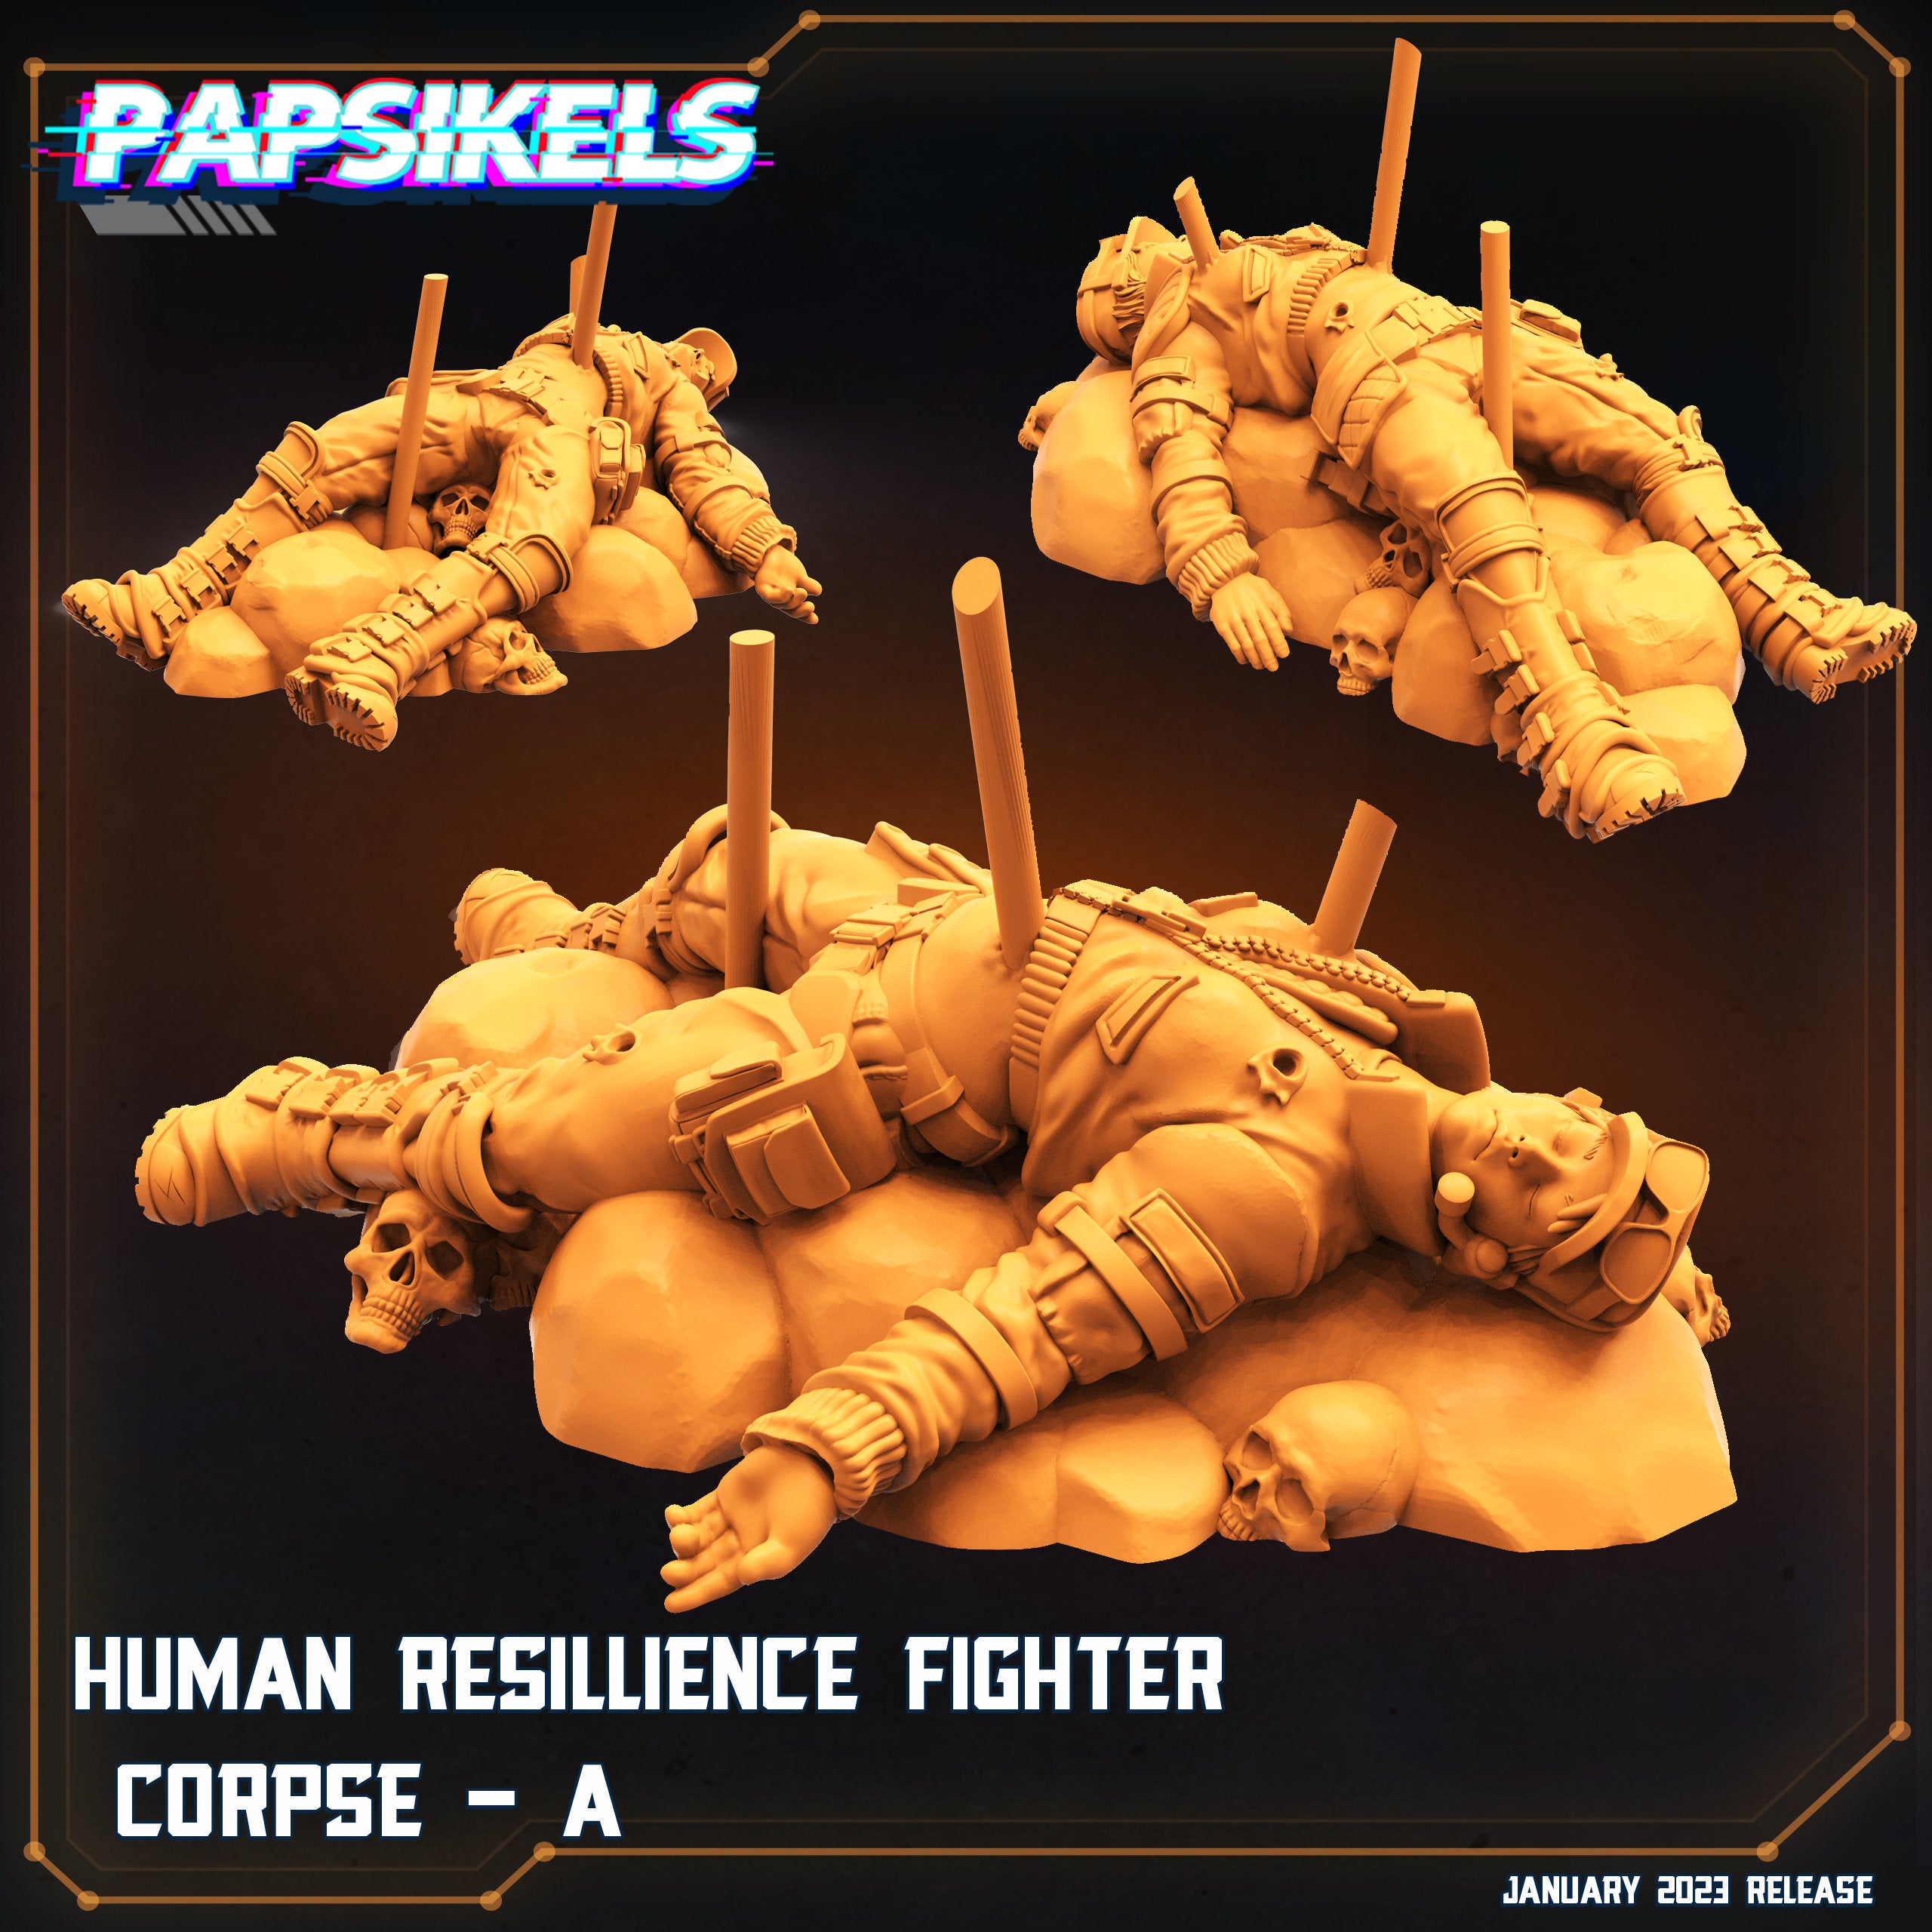 4 x Future Resistance Fighter Bodies